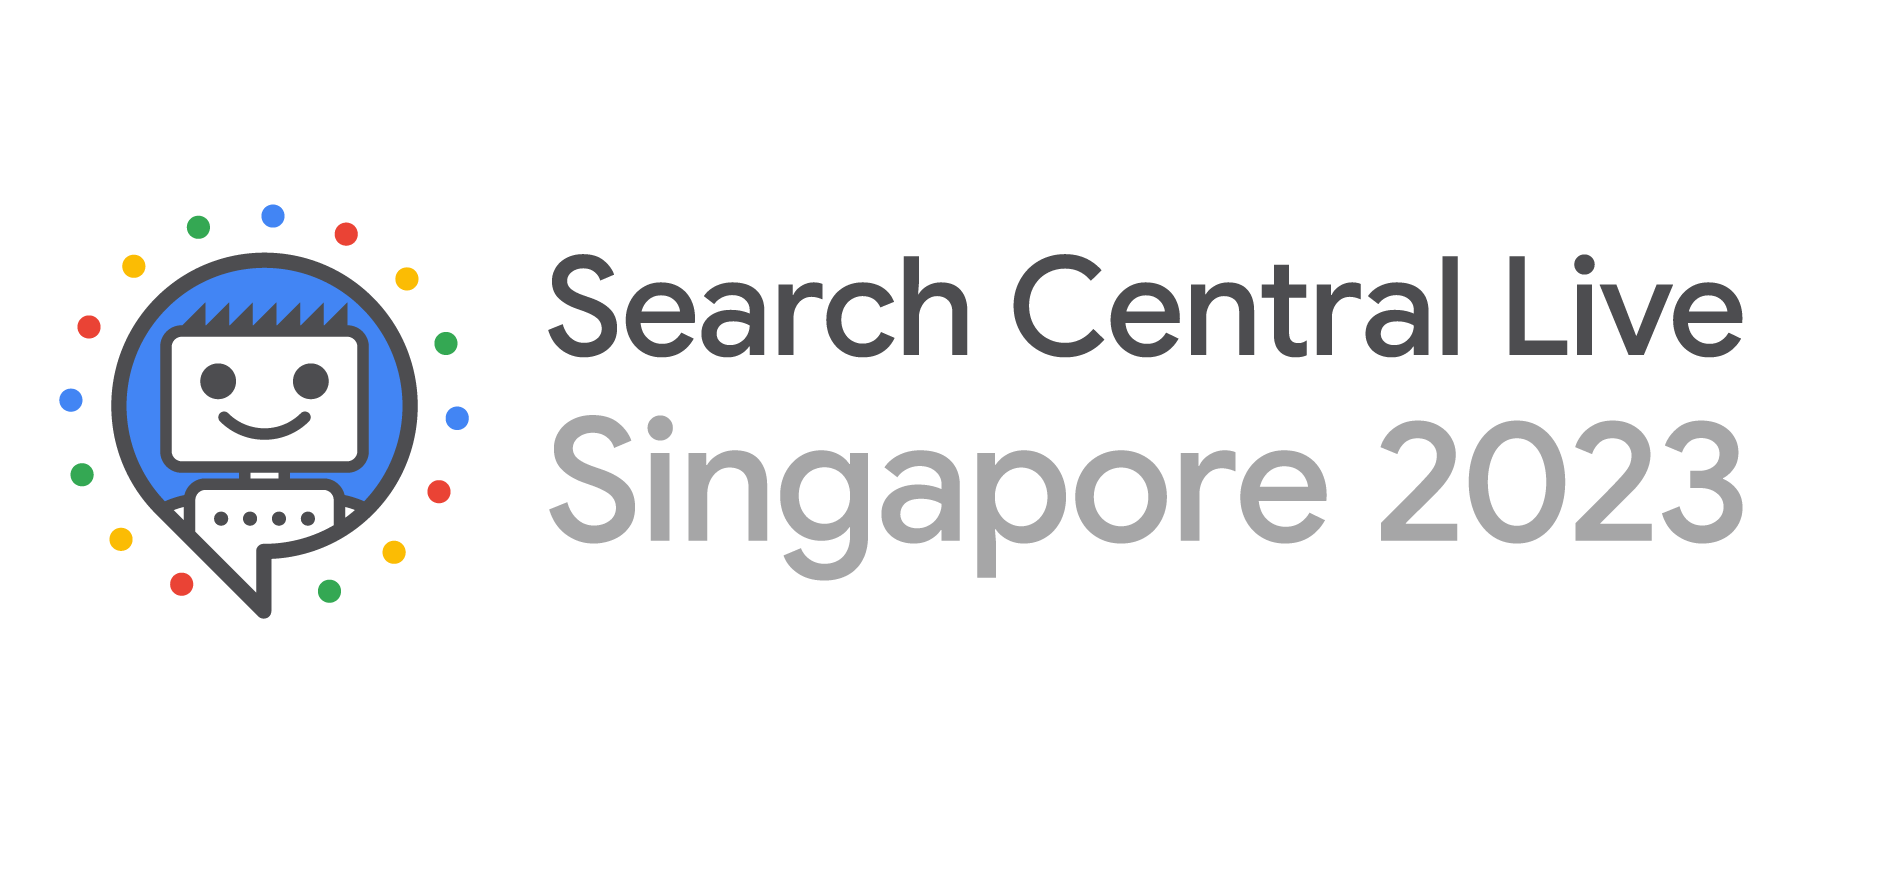 Search Central Live Singapore 2023